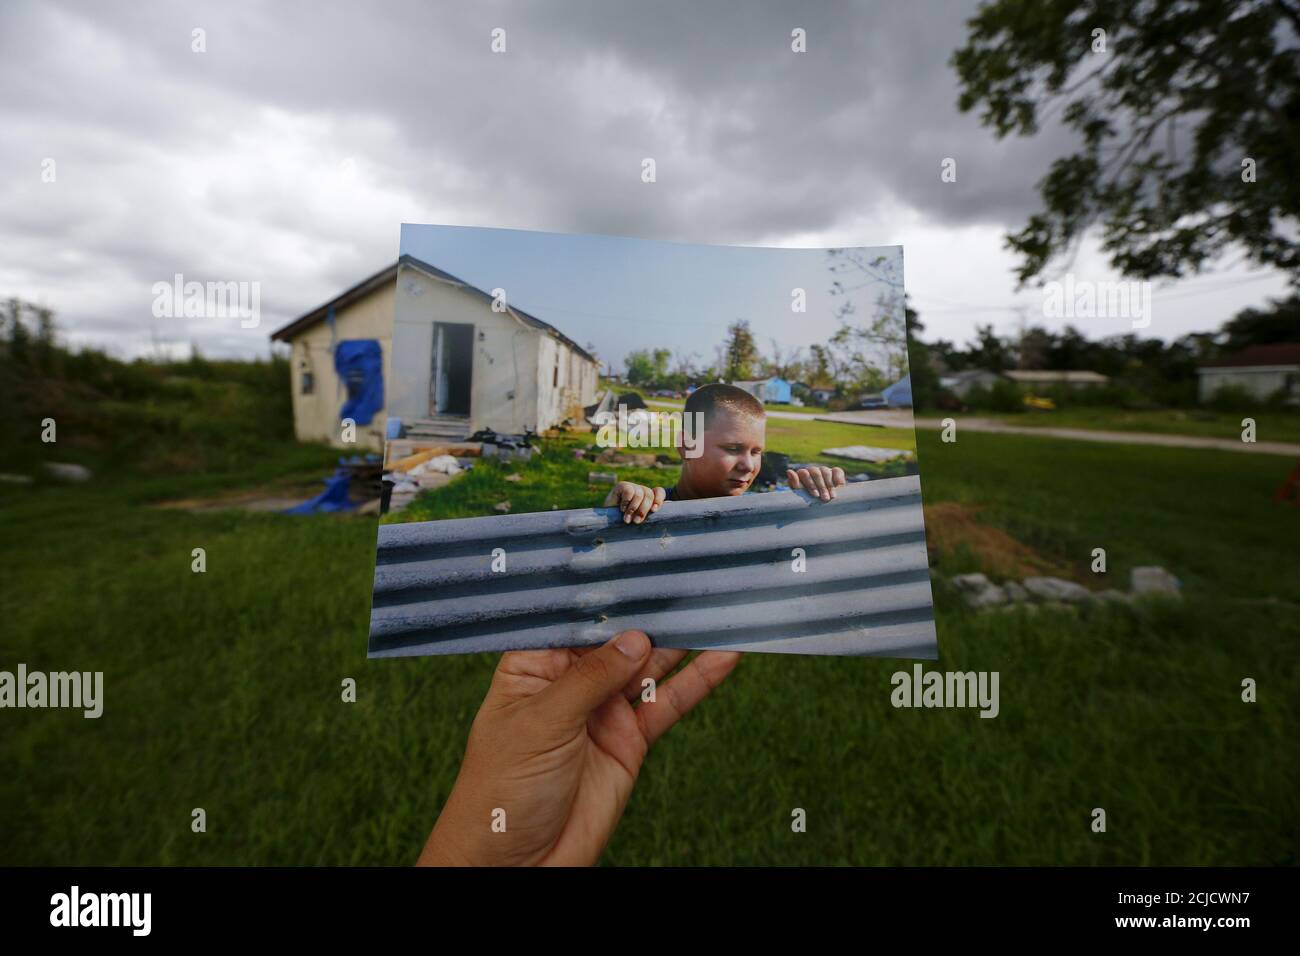 Photographer Carlos Barria holds a print of a photograph he took in 2005, as he matches it up at the same location 10 years on, in Lafitte, south of New Orleans, United States, August 16, 2015. The print shows Tyler Teal cleaning up his home, September 14, 2005, after Hurricane Katrina struck. In 2005, Hurricane Katrina triggered floods that inundated New Orleans and killed more than 1,500 people as storm waters overwhelmed levees and broke through floodwalls. Congress authorised spending more than $14 billion to beef up the city's flood protection after Katrina and built a series of new barri Stock Photo